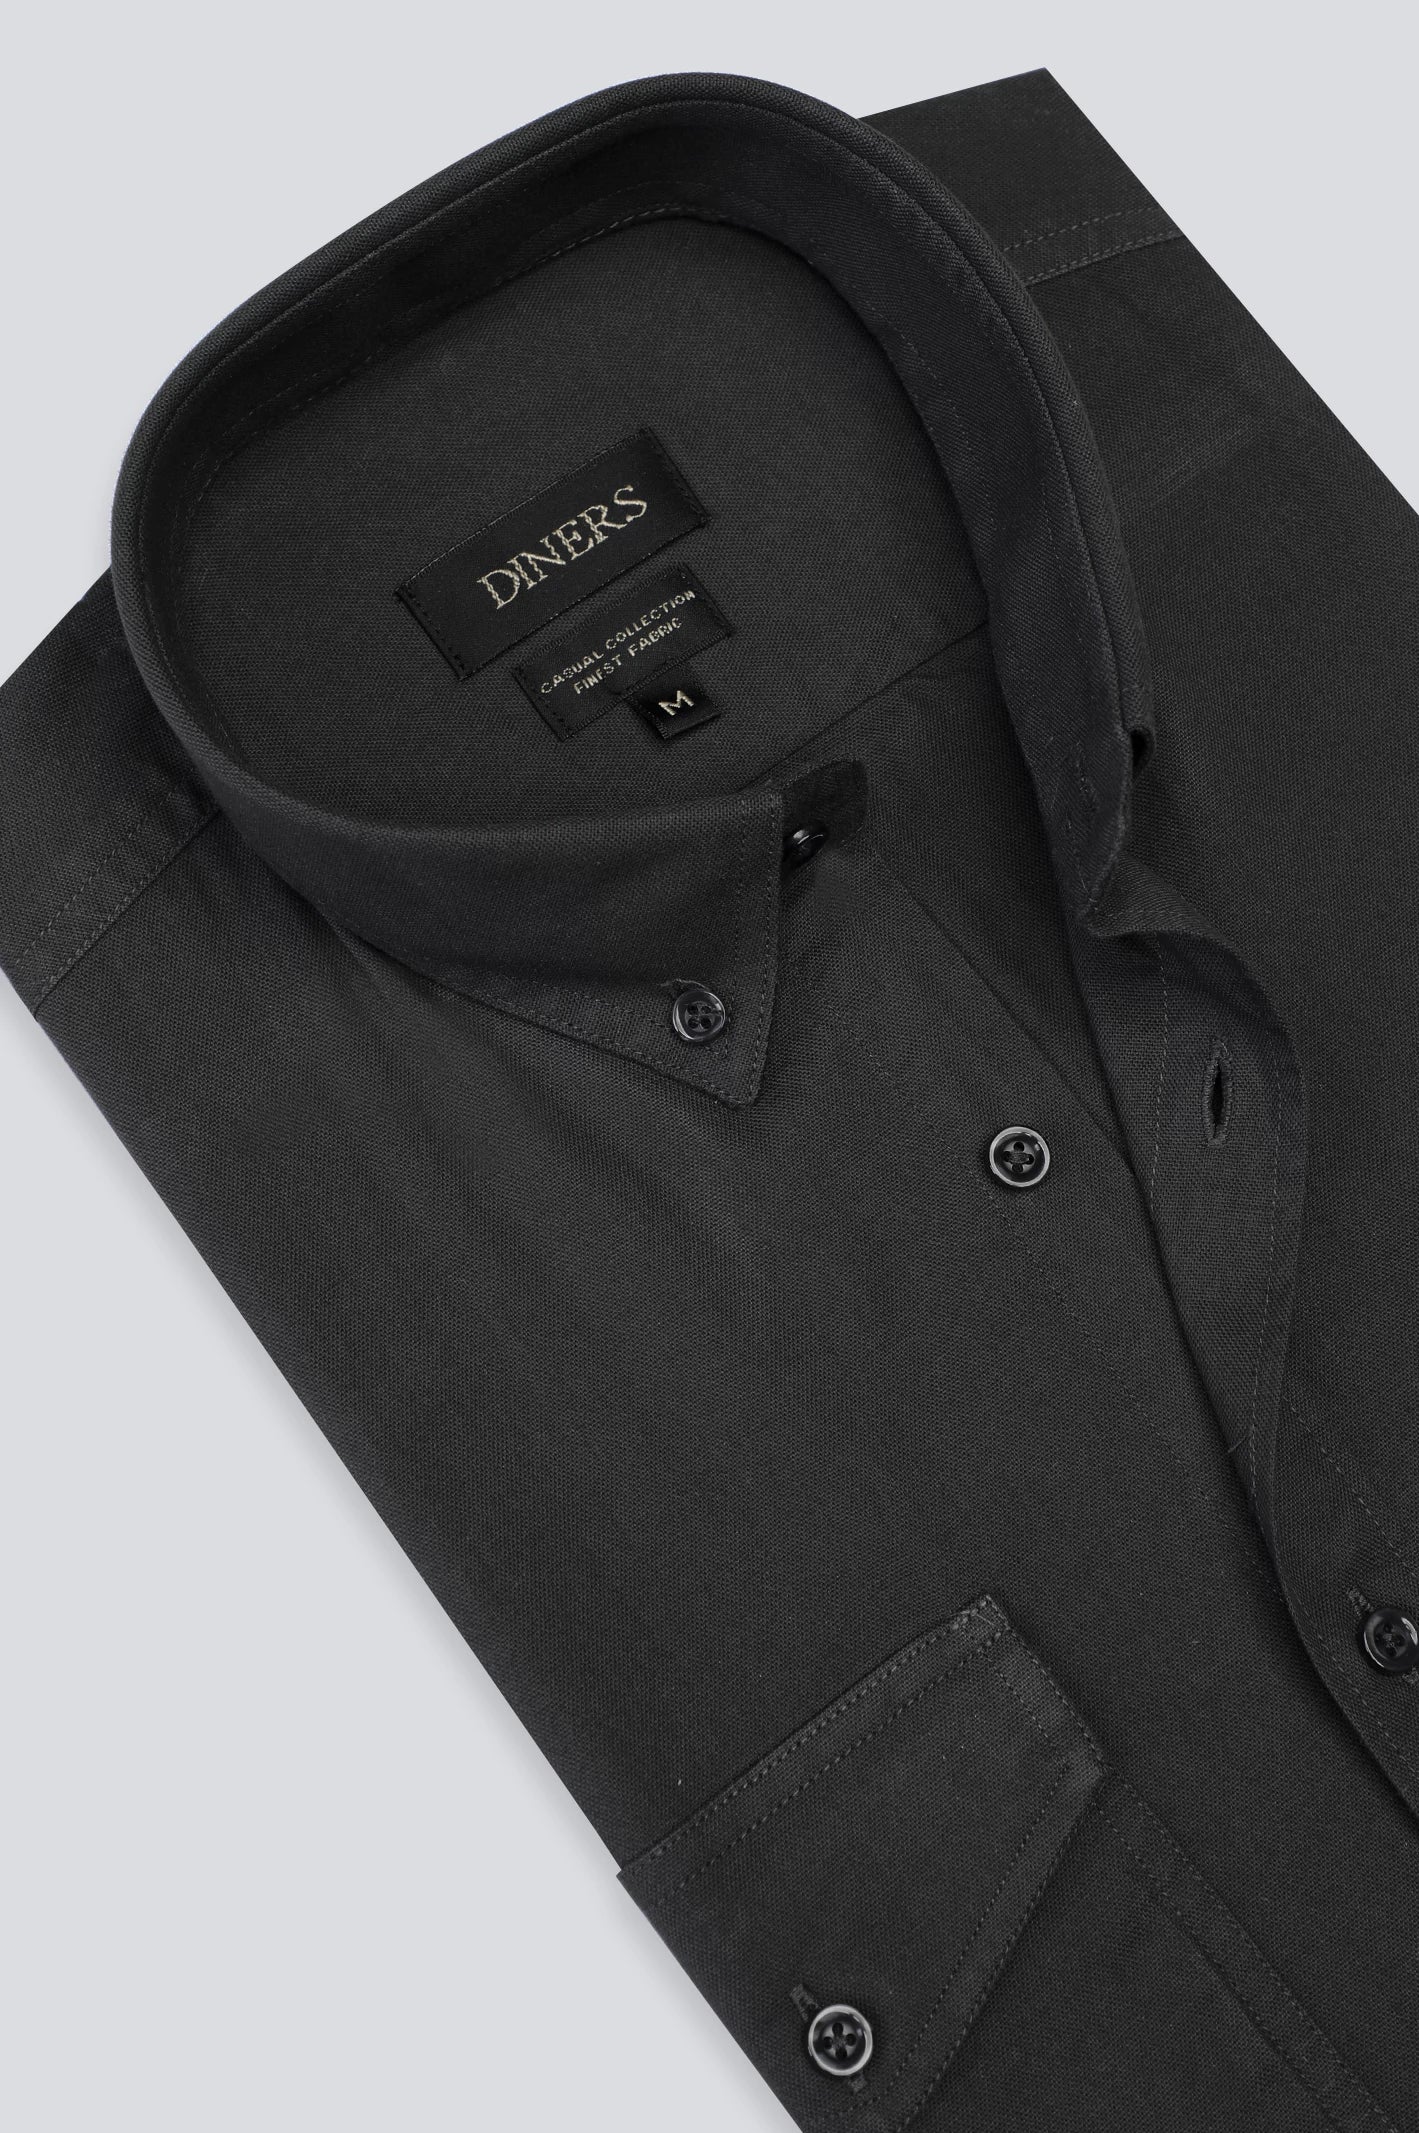 Black Plain Casual Shirt For Men From Diners